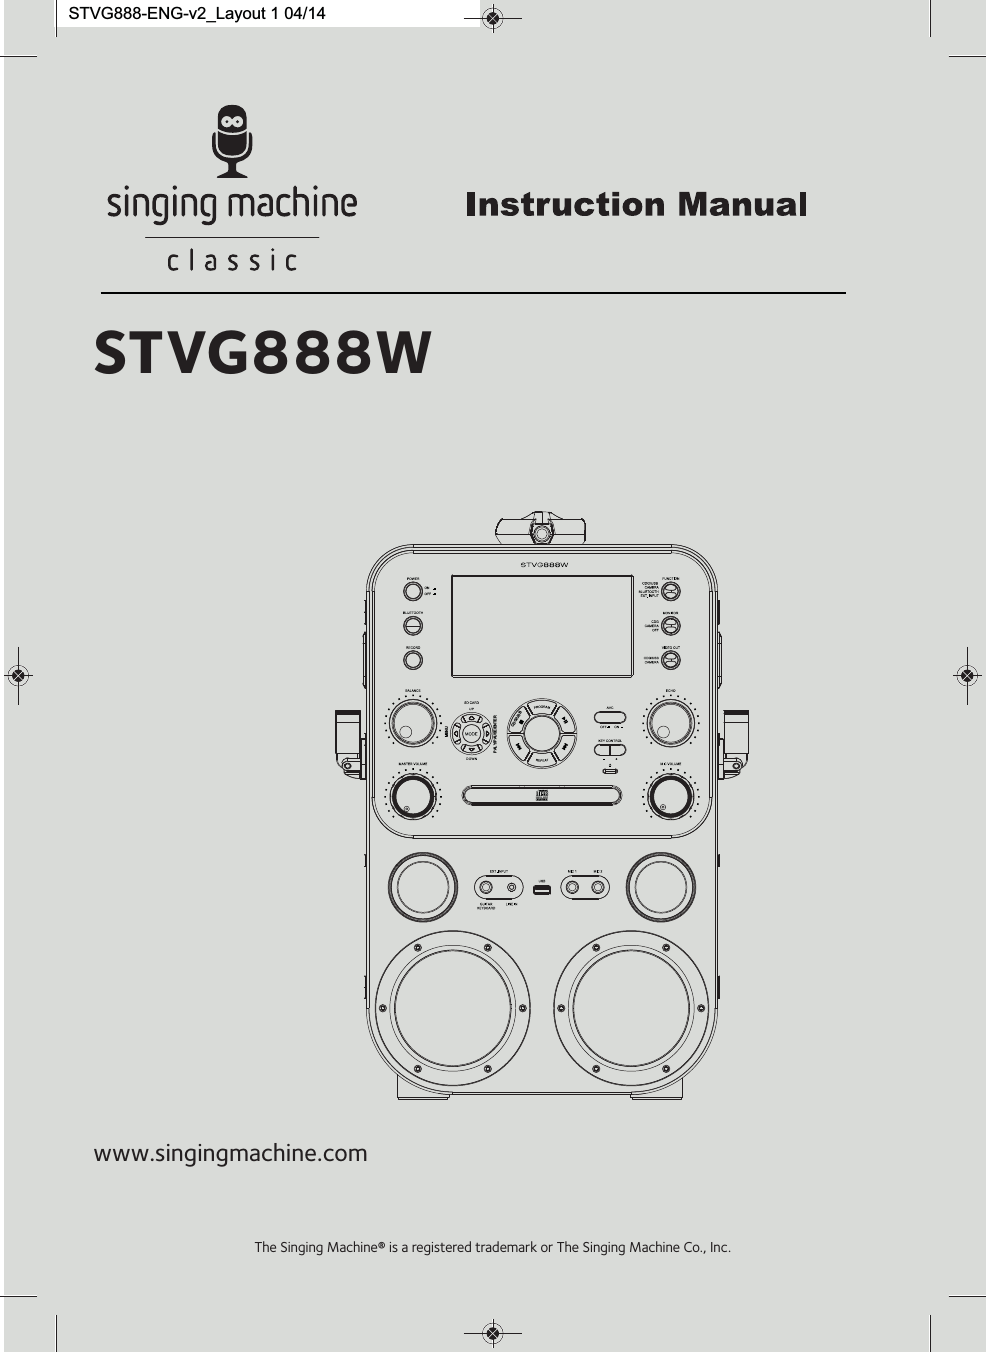 The Singing Machine® is a registered trademark or The Singing Machine Co., Inc.STVG888Wwww.singingmachine.comSTVG888-ENG-v2_Layout 1 04/14MENUCDG/USBPALY/PAUSE/ENTER